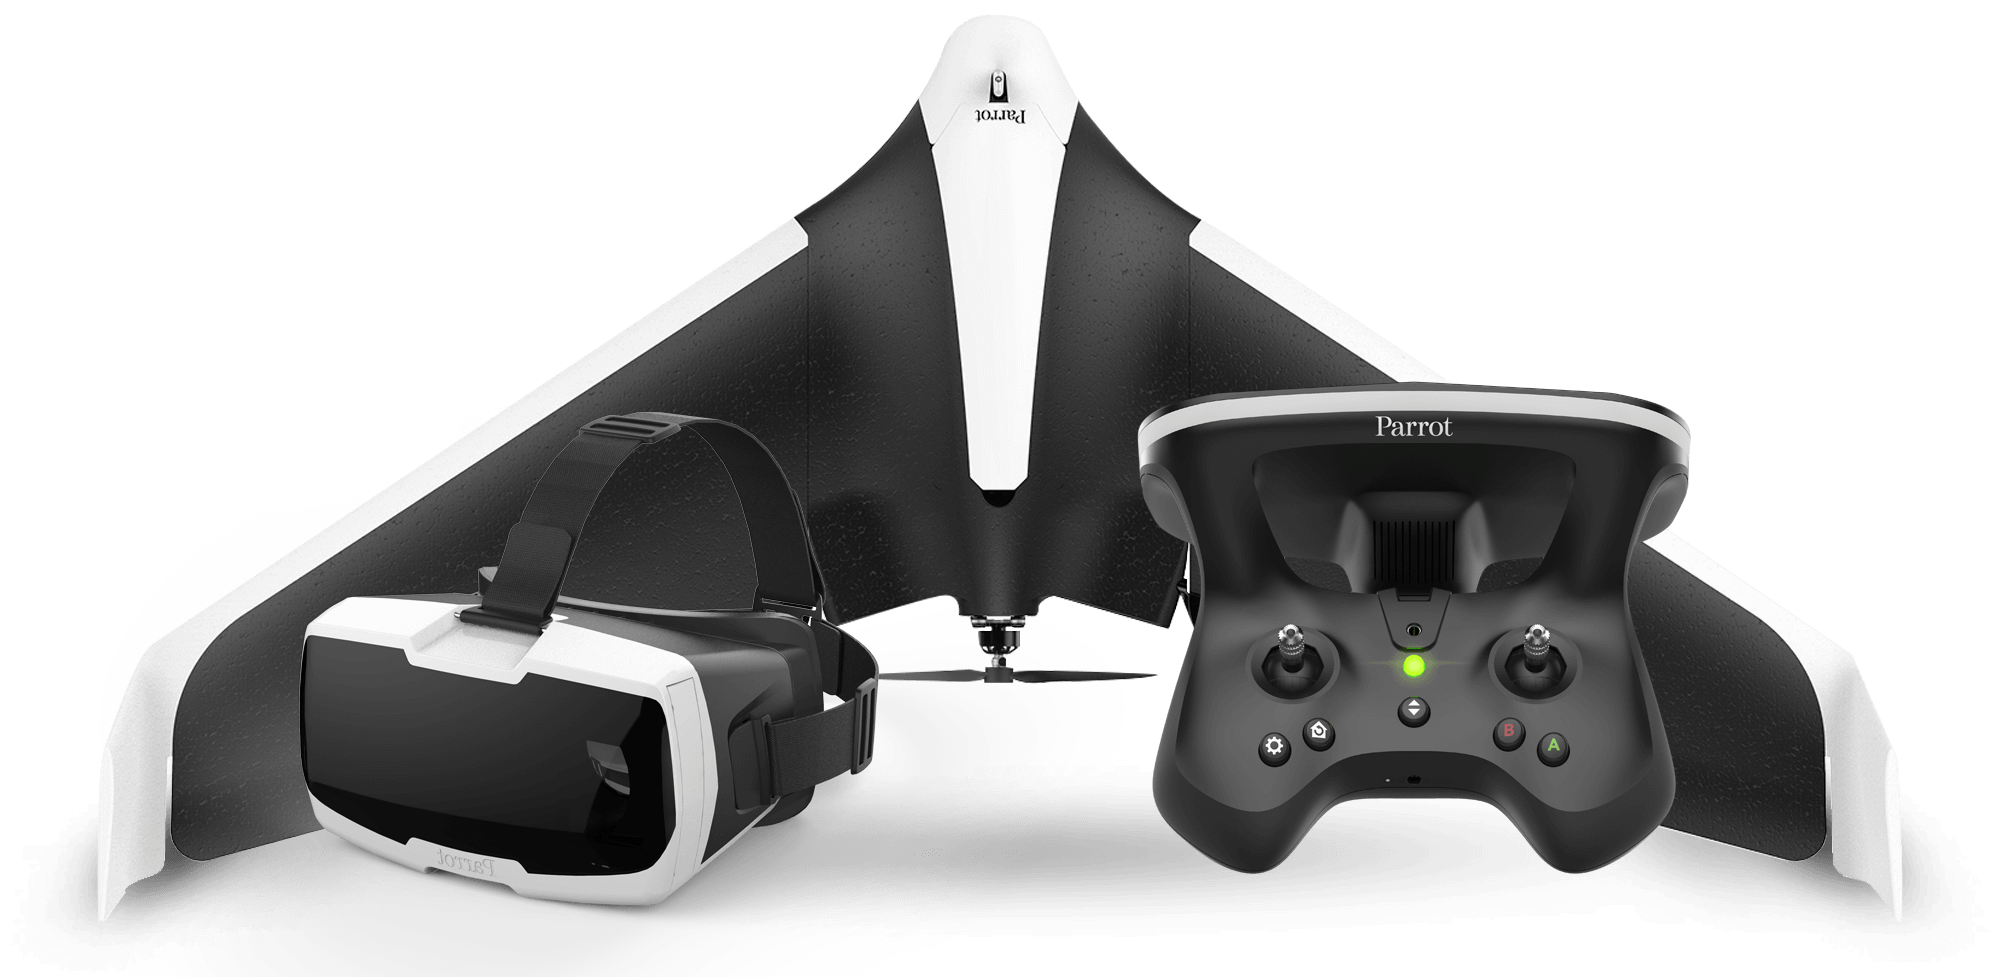 Parrot Disco first person view drone